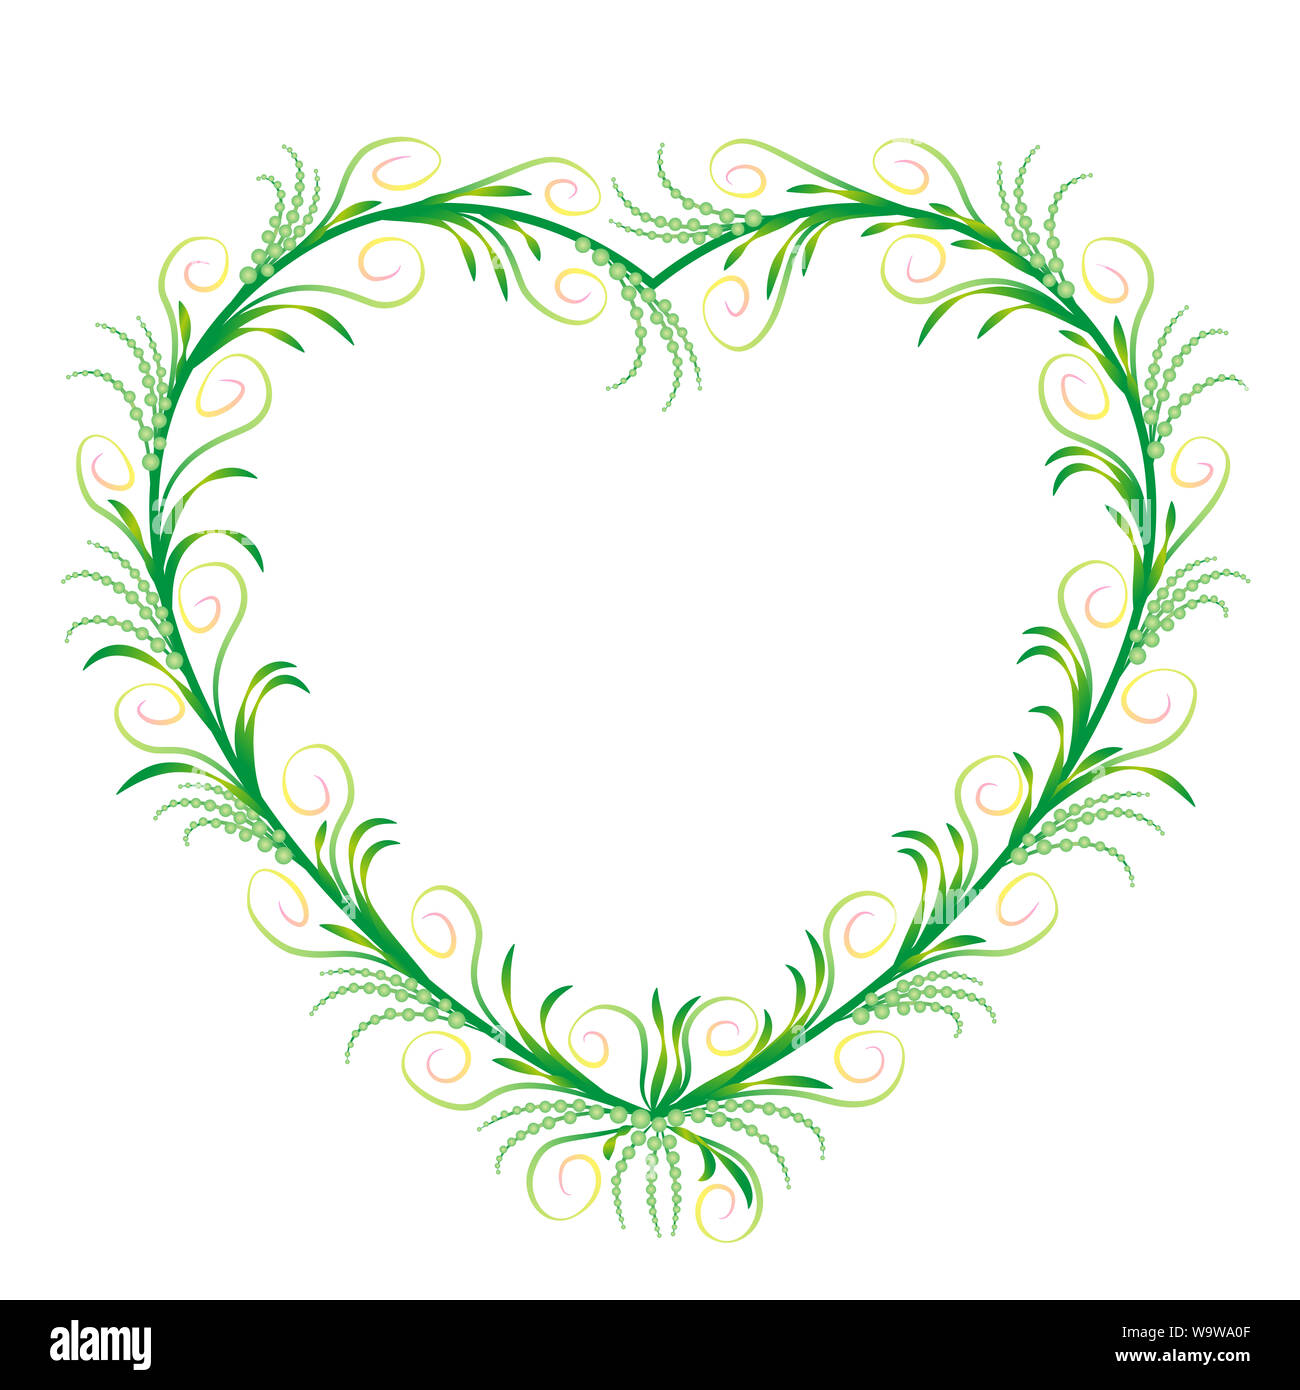 Delicate, filigree heart frame. Romantic, elegant, feminine, floral green heart ornament with graceful and sylphlike spiral flourishes. Stock Photo